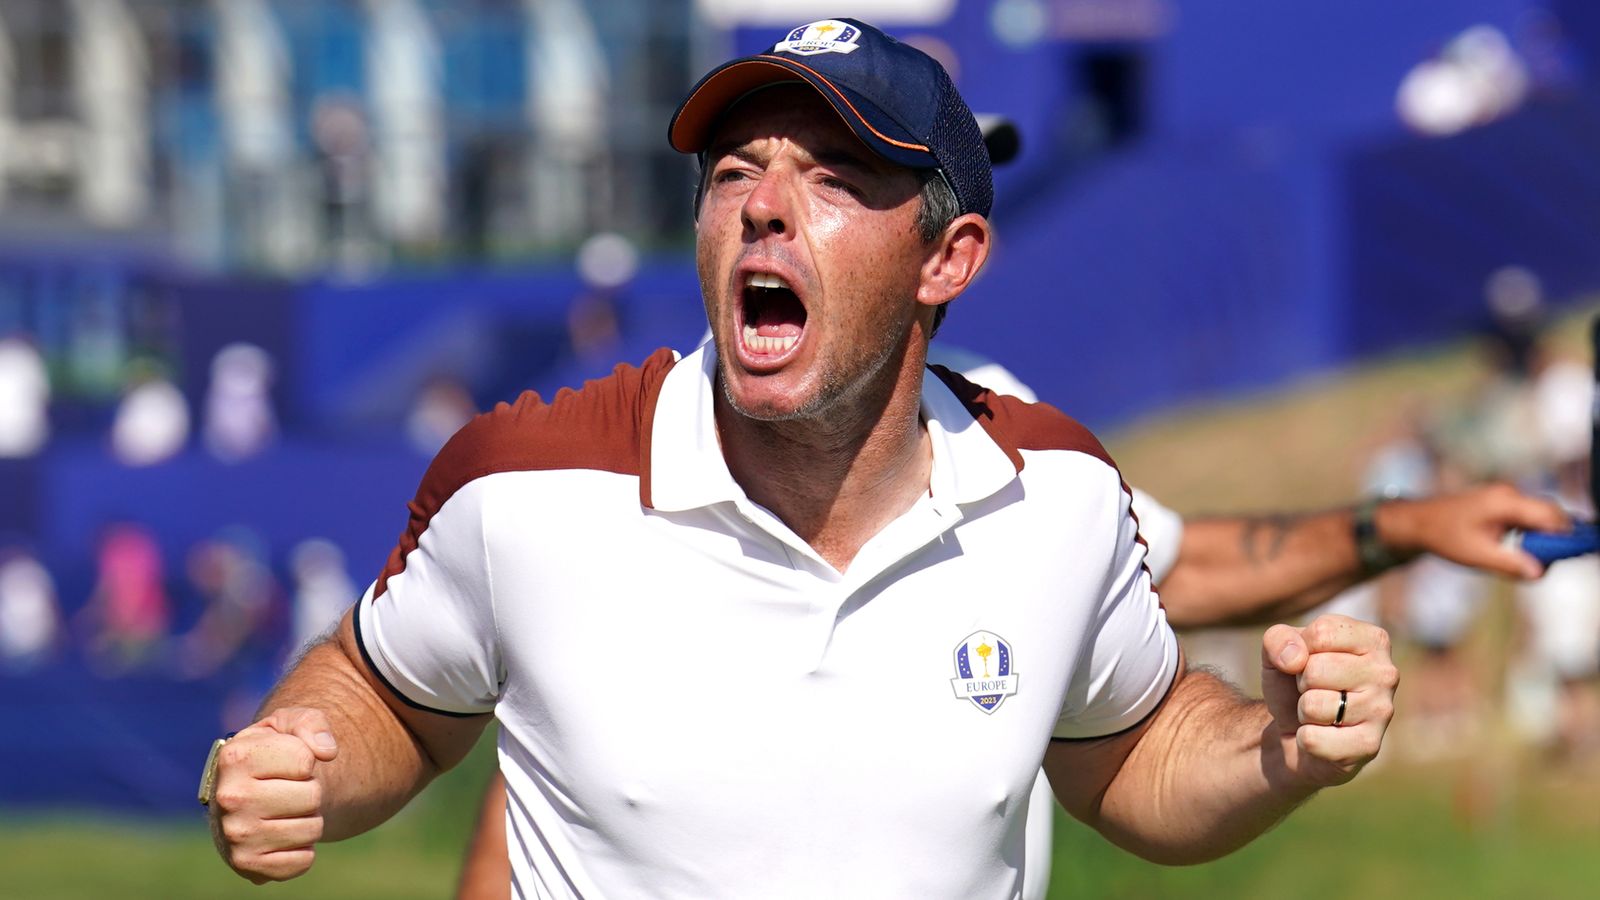 Ryder Cup bust-up explained: Inside story of how controversy helped Europe to victory in Rome